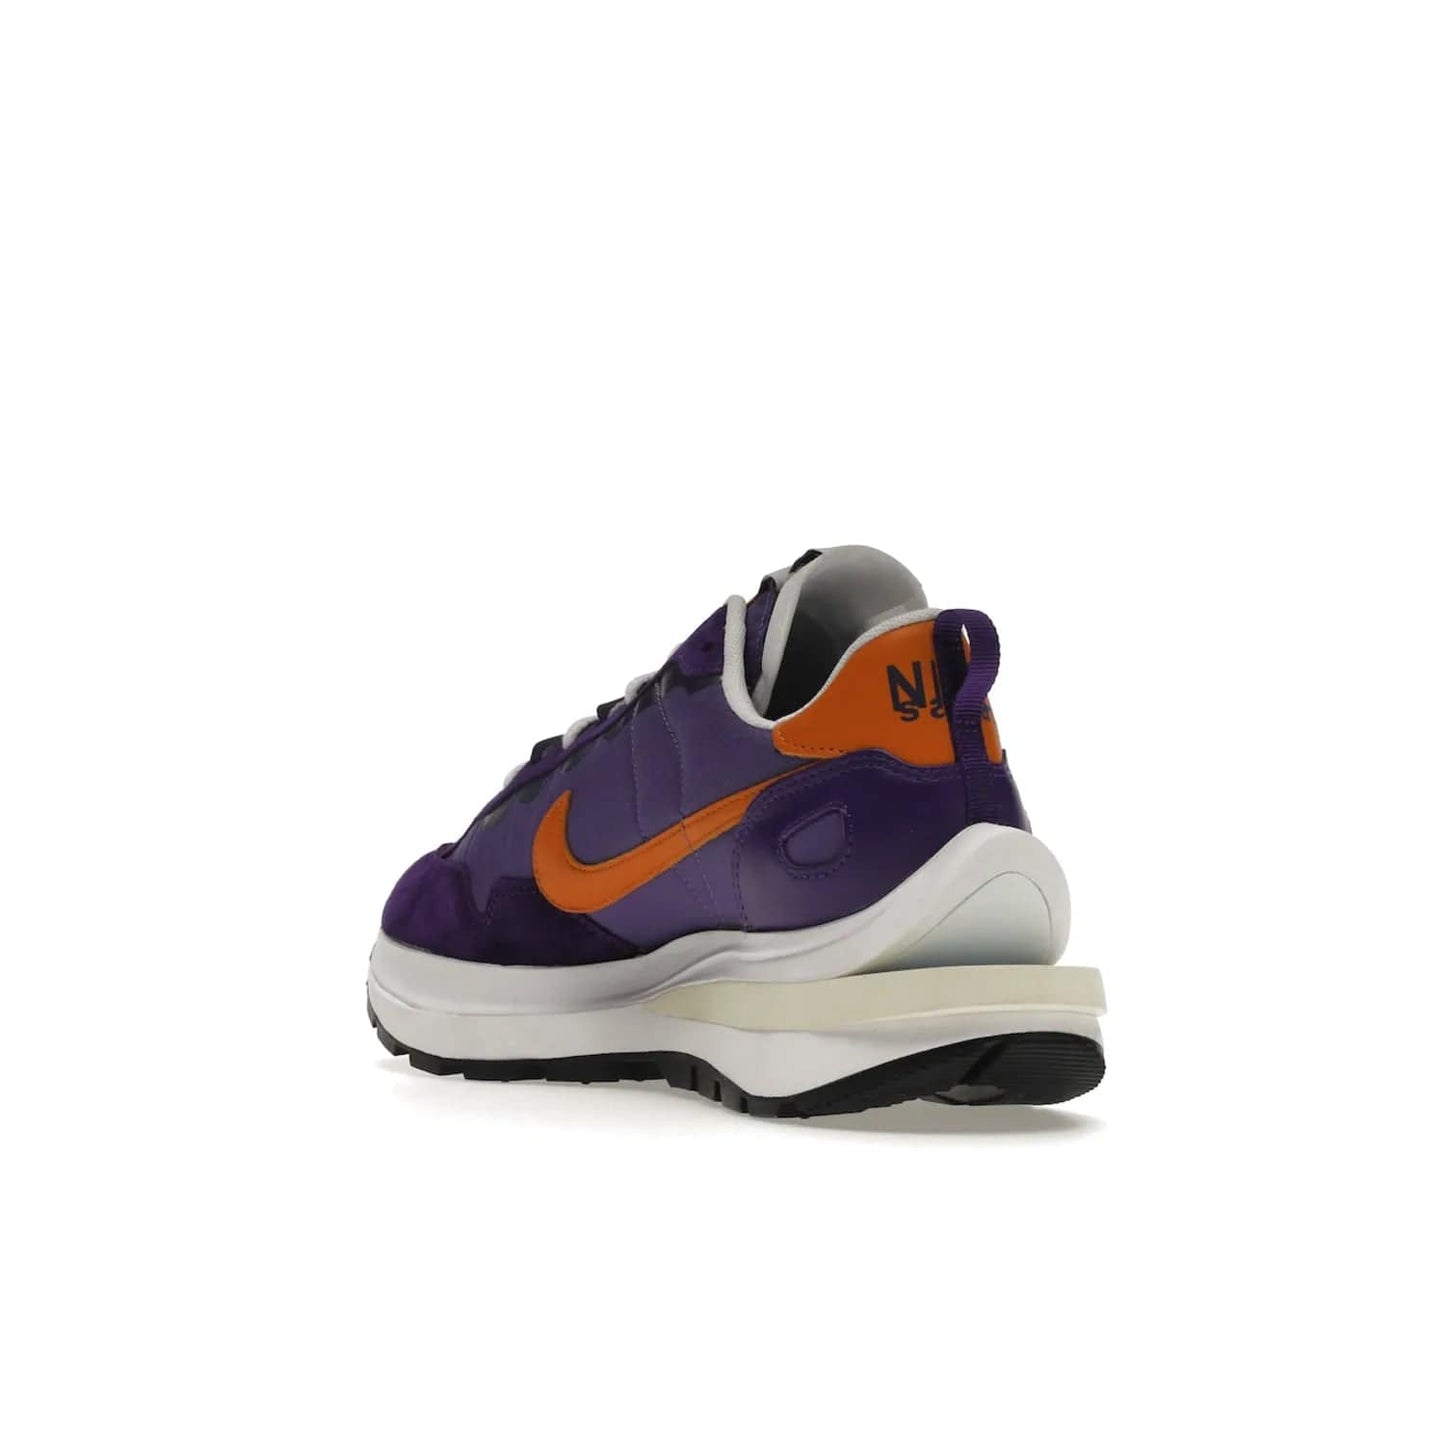 Nike Vaporwaffle sacai Dark Iris - Image 25 - Only at www.BallersClubKickz.com - Unique Nike Vaporwaffle sacai Dark Iris collab. Suede, leather & textile upper with Orange accents. Dual tongues & midsoles. Woven labels & heel tabs branding. Colorway of Purple, Orange, White & Black. Must-have for any wardrobe.